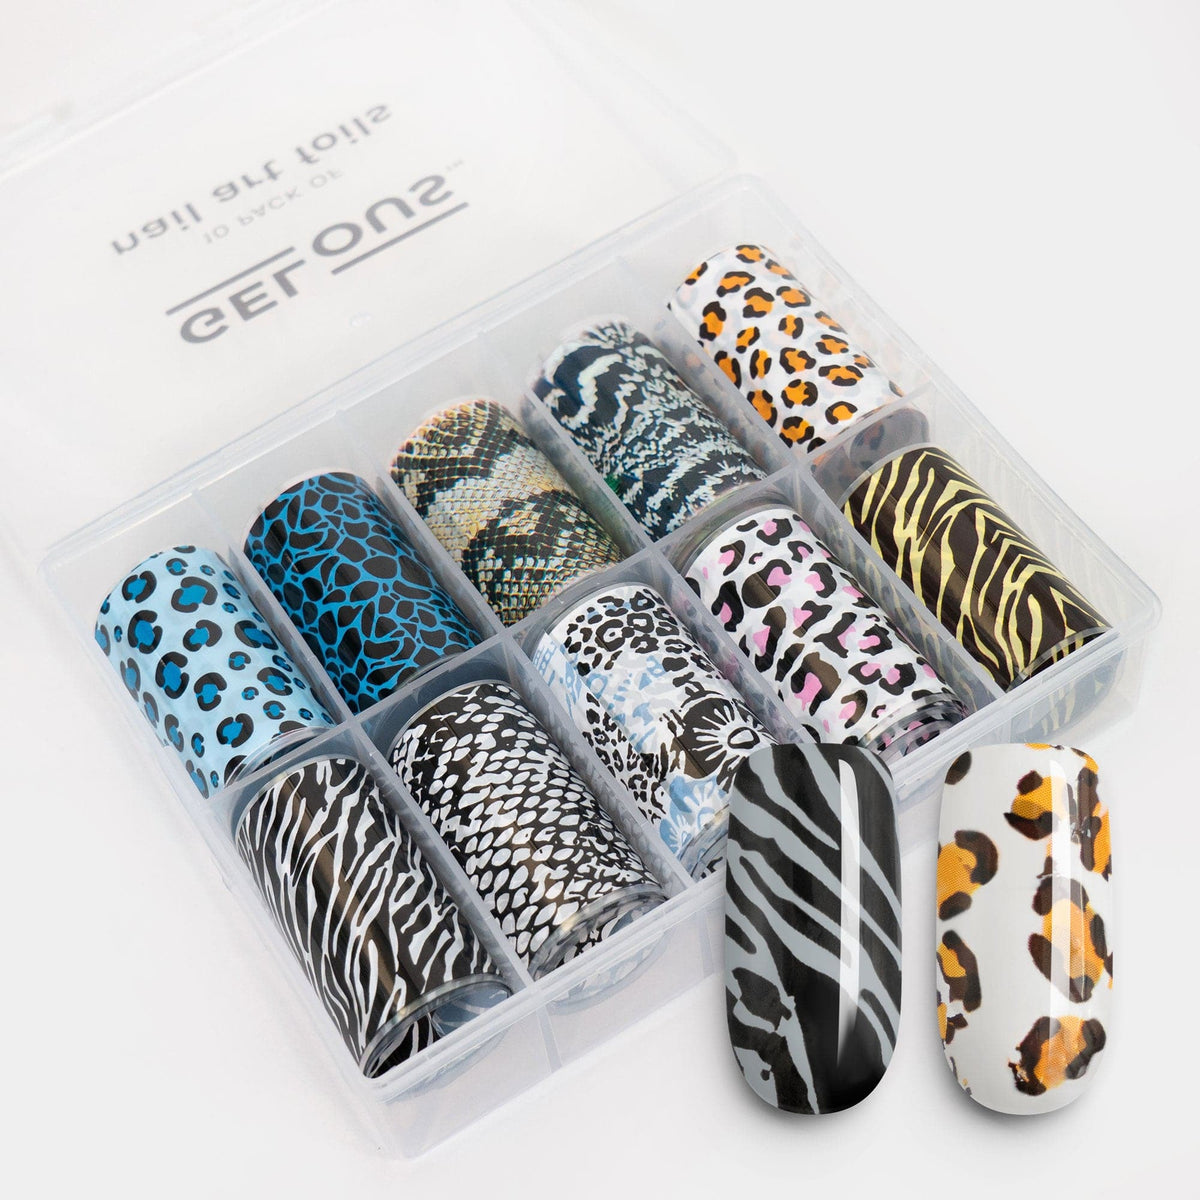 Gelous Be Wild Nail Art Foils product photo - photographed in New Zealand